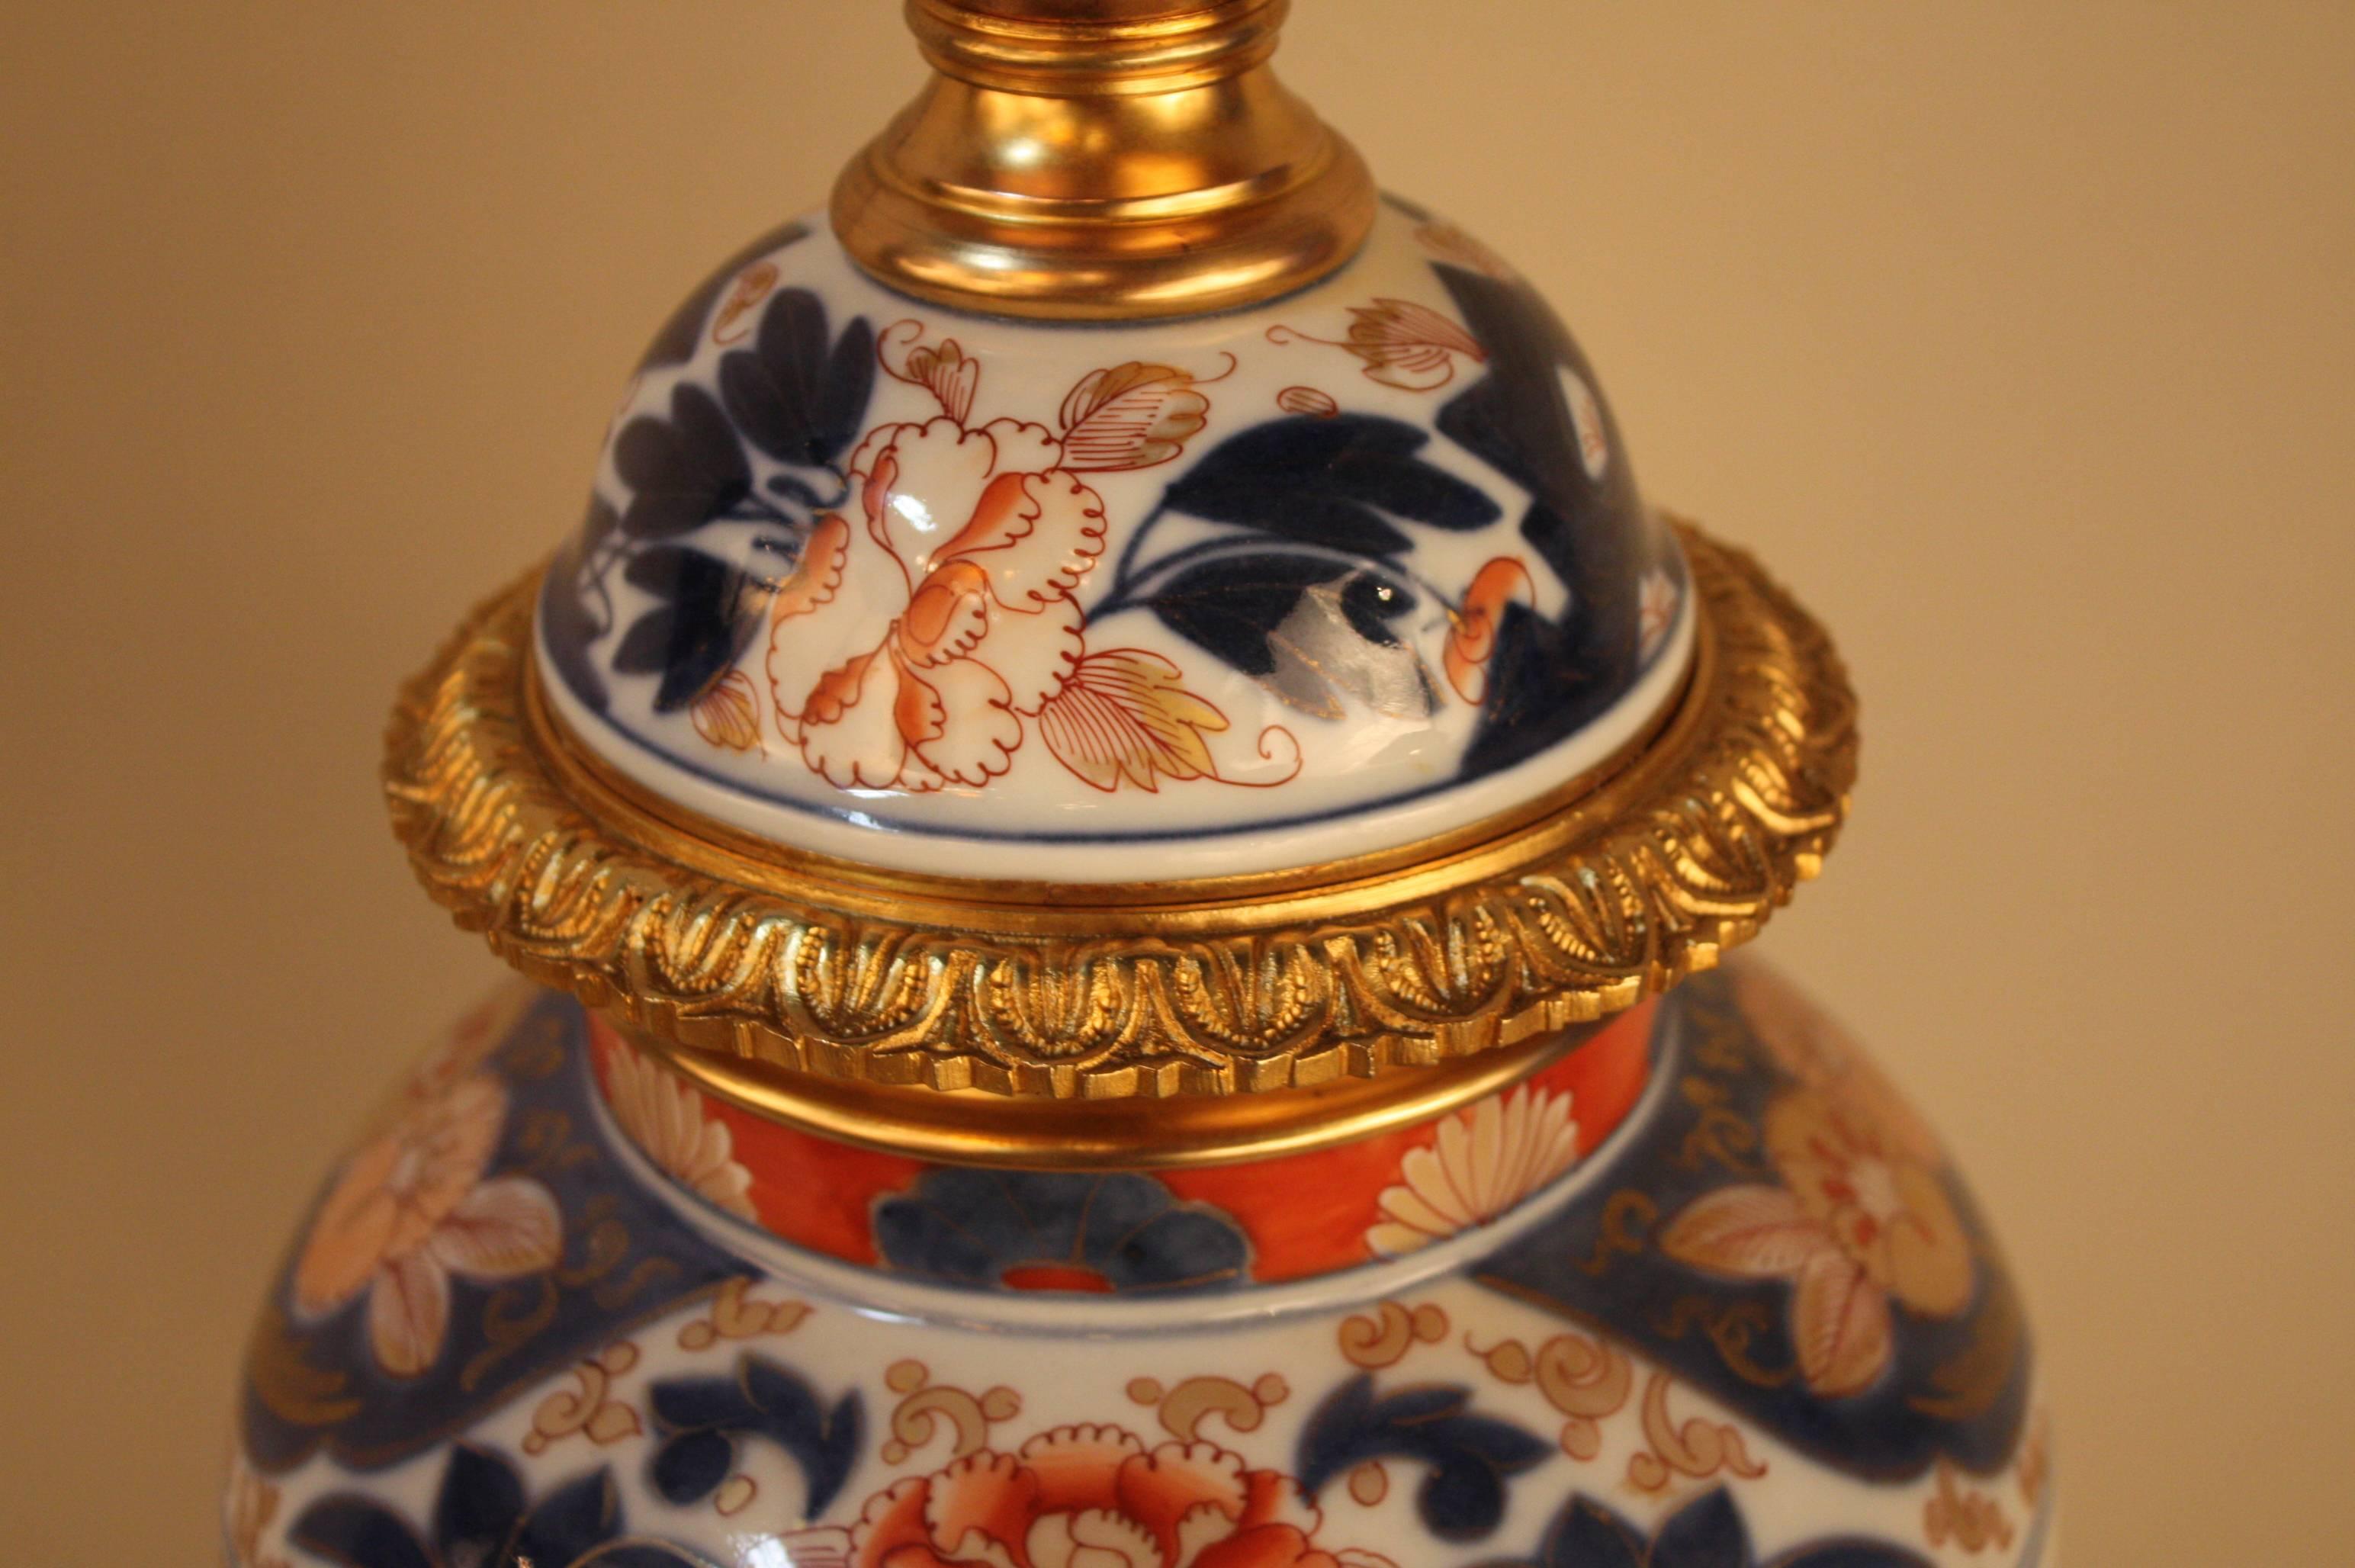 Late 19th Century 19th Century Imari Porcelain and Gilt Bronze-Mounted Electrified Oil Lamp